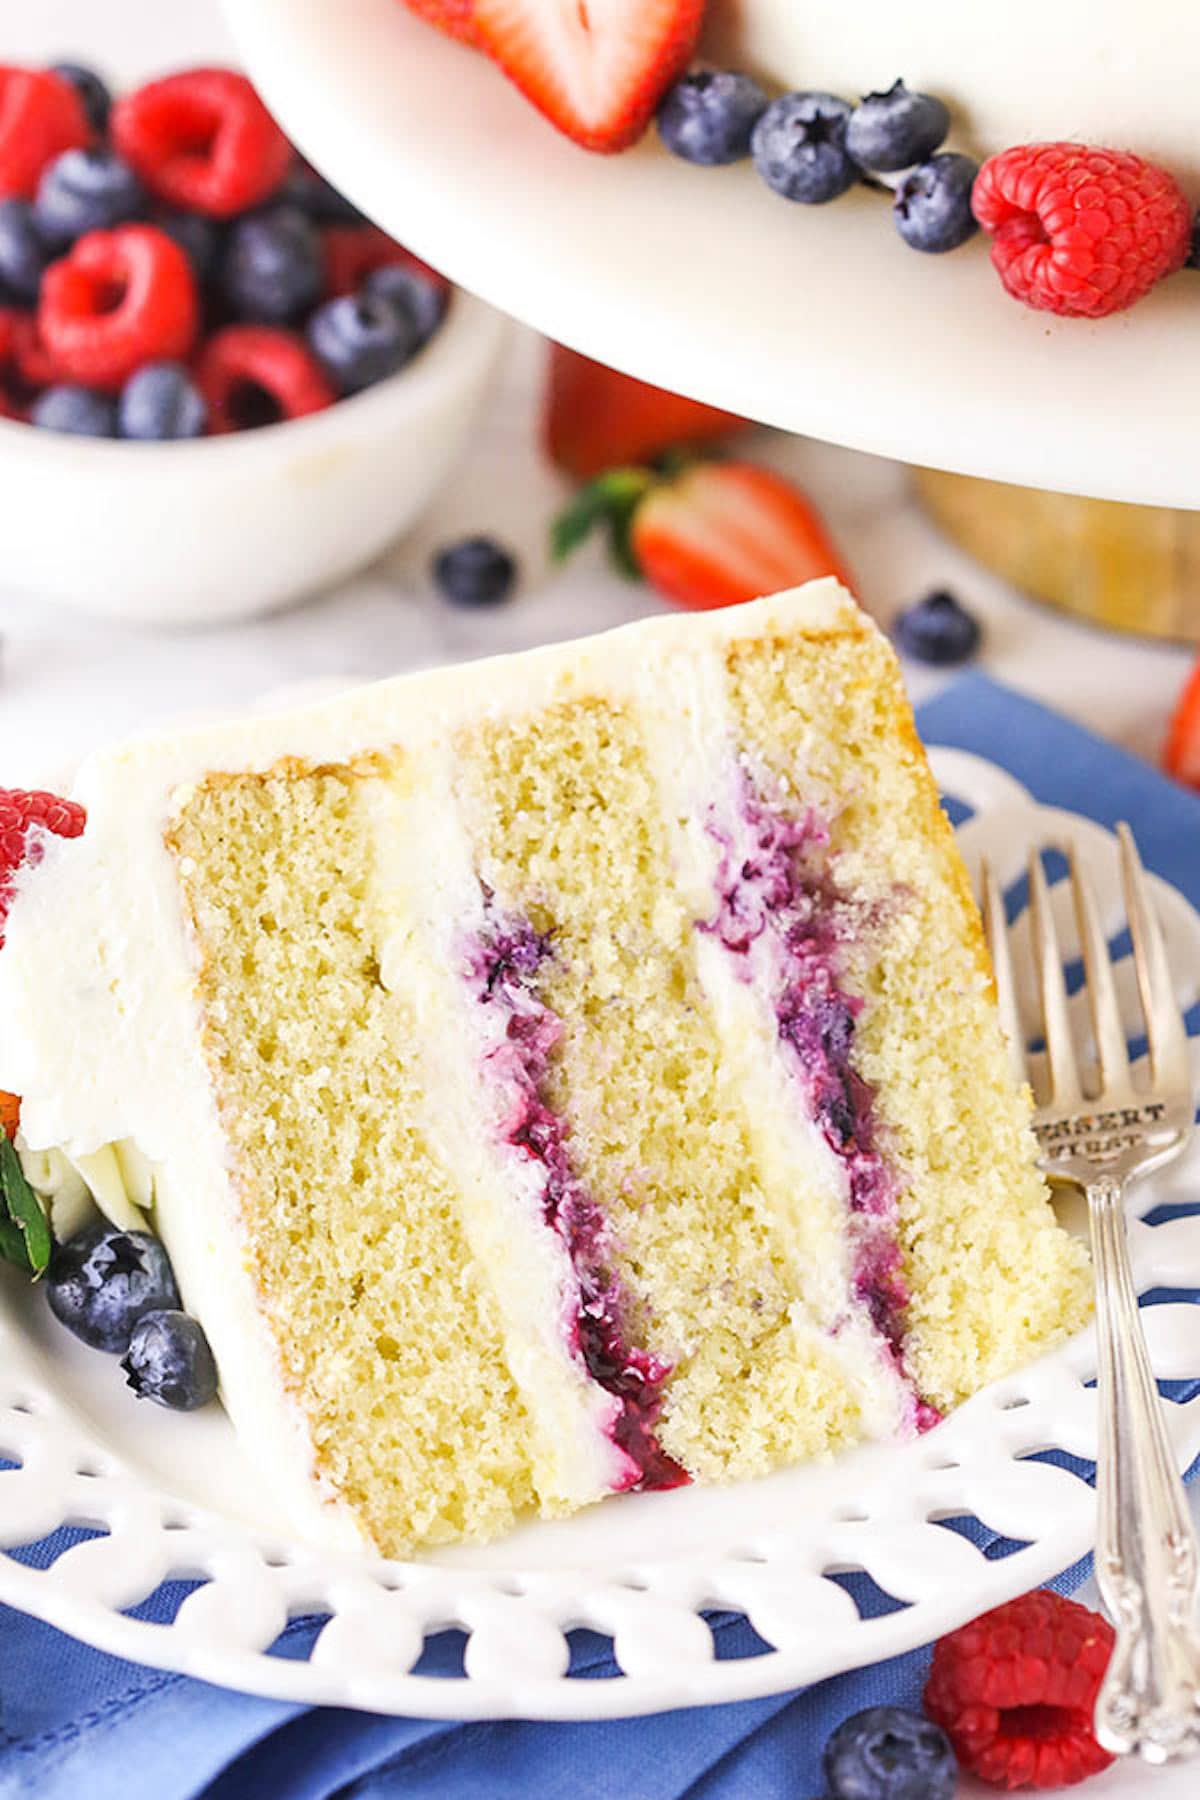 A Piece of Chantilly Layer Cake on a Plate with Fresh Berries